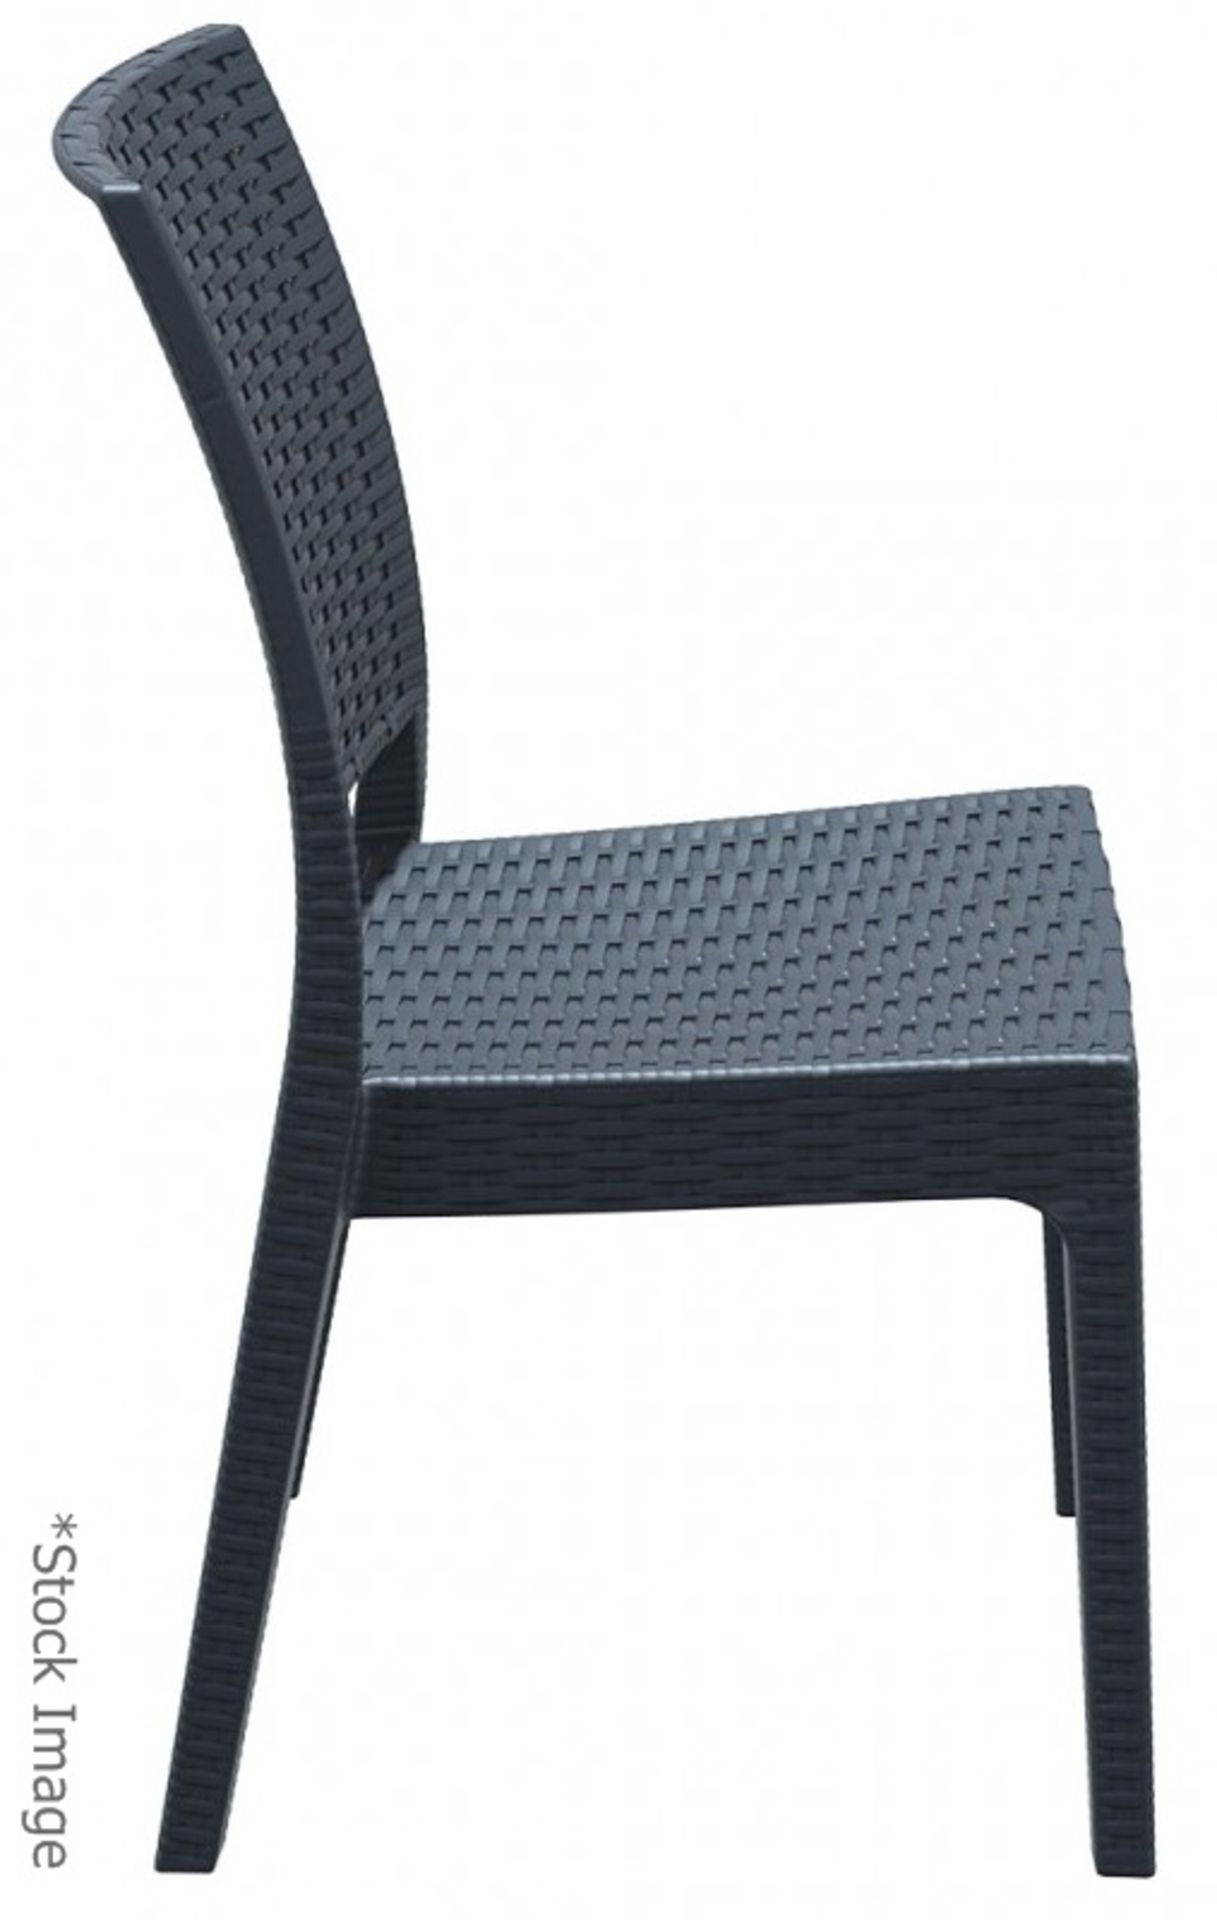 8 x Siesta 'Florida' Rattan Style Garden Chairs In Dark Grey - Suitable For Commercial or Home Use - - Image 12 of 14